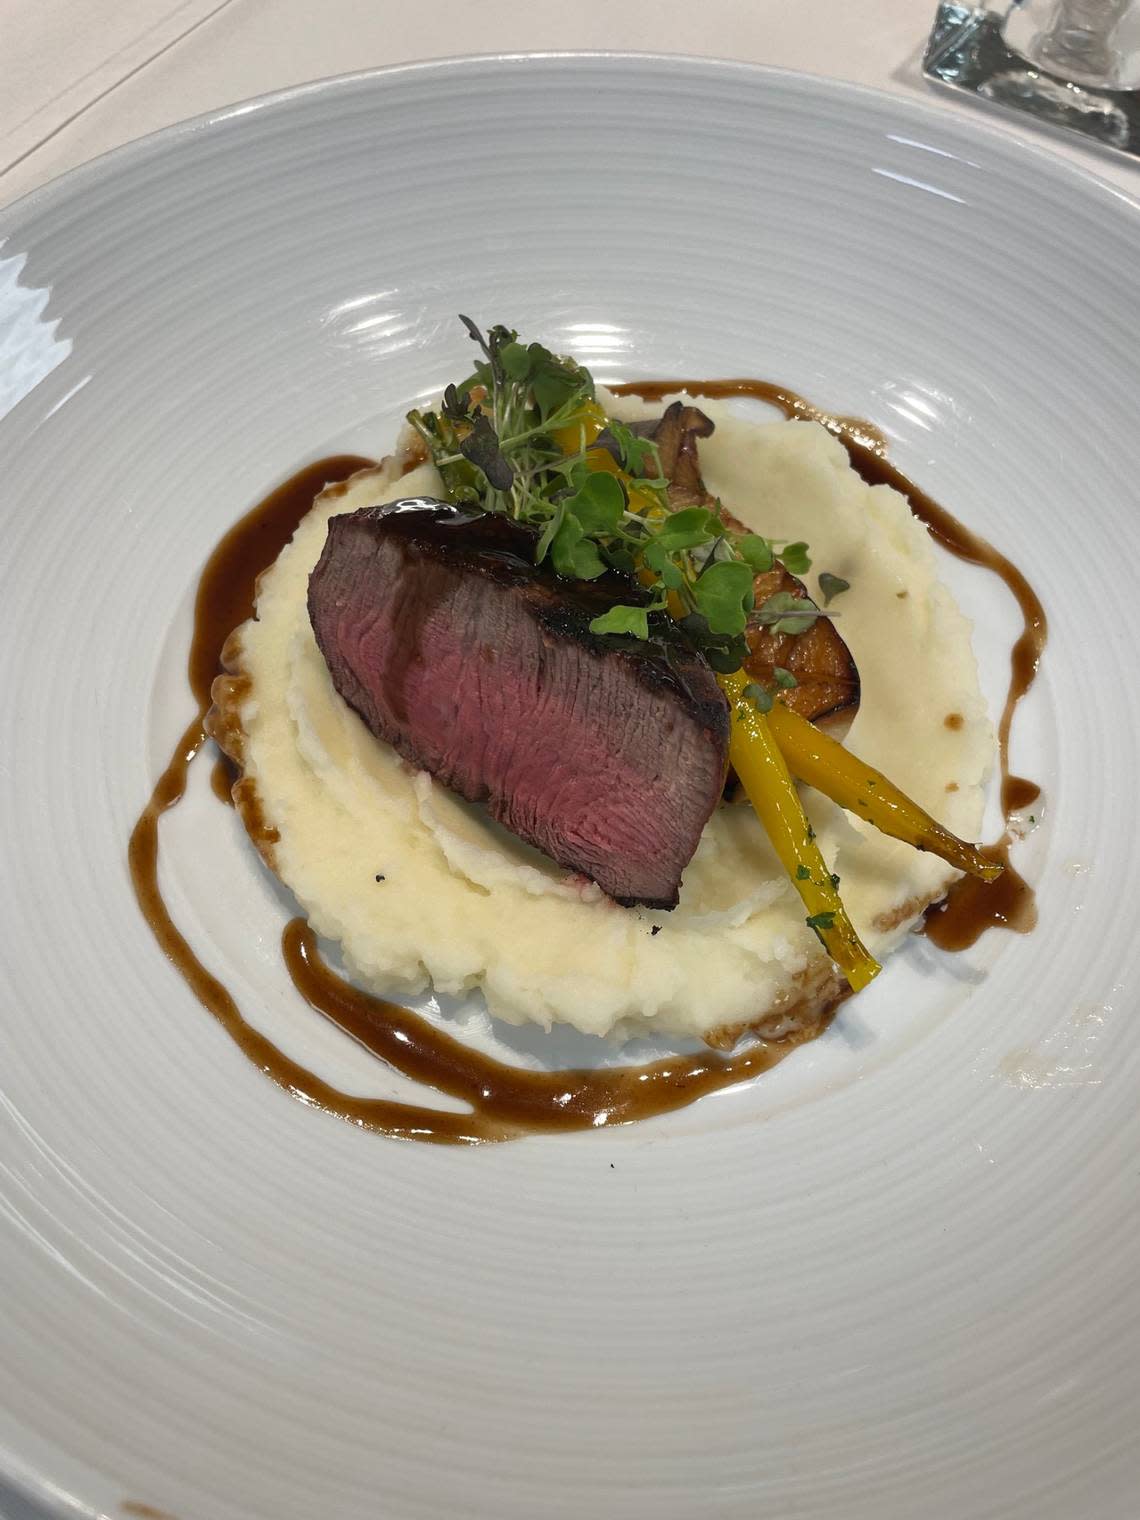 The Brown Hotel Chef’s Table special dinner menu included Center Cut Filet Mignon in a recent preview.